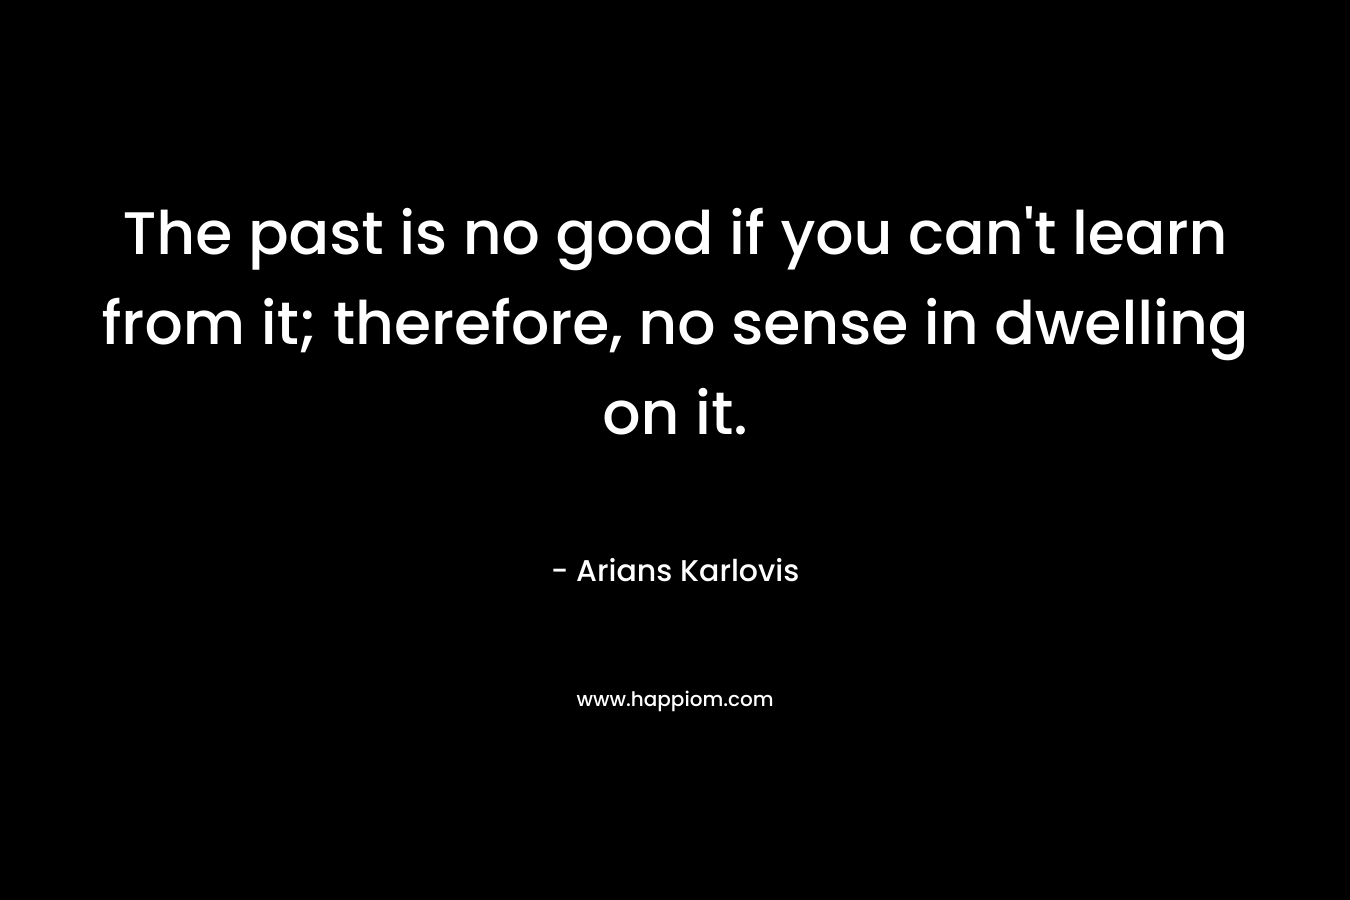 The past is no good if you can’t learn from it; therefore, no sense in dwelling on it. – Arians Karlovis